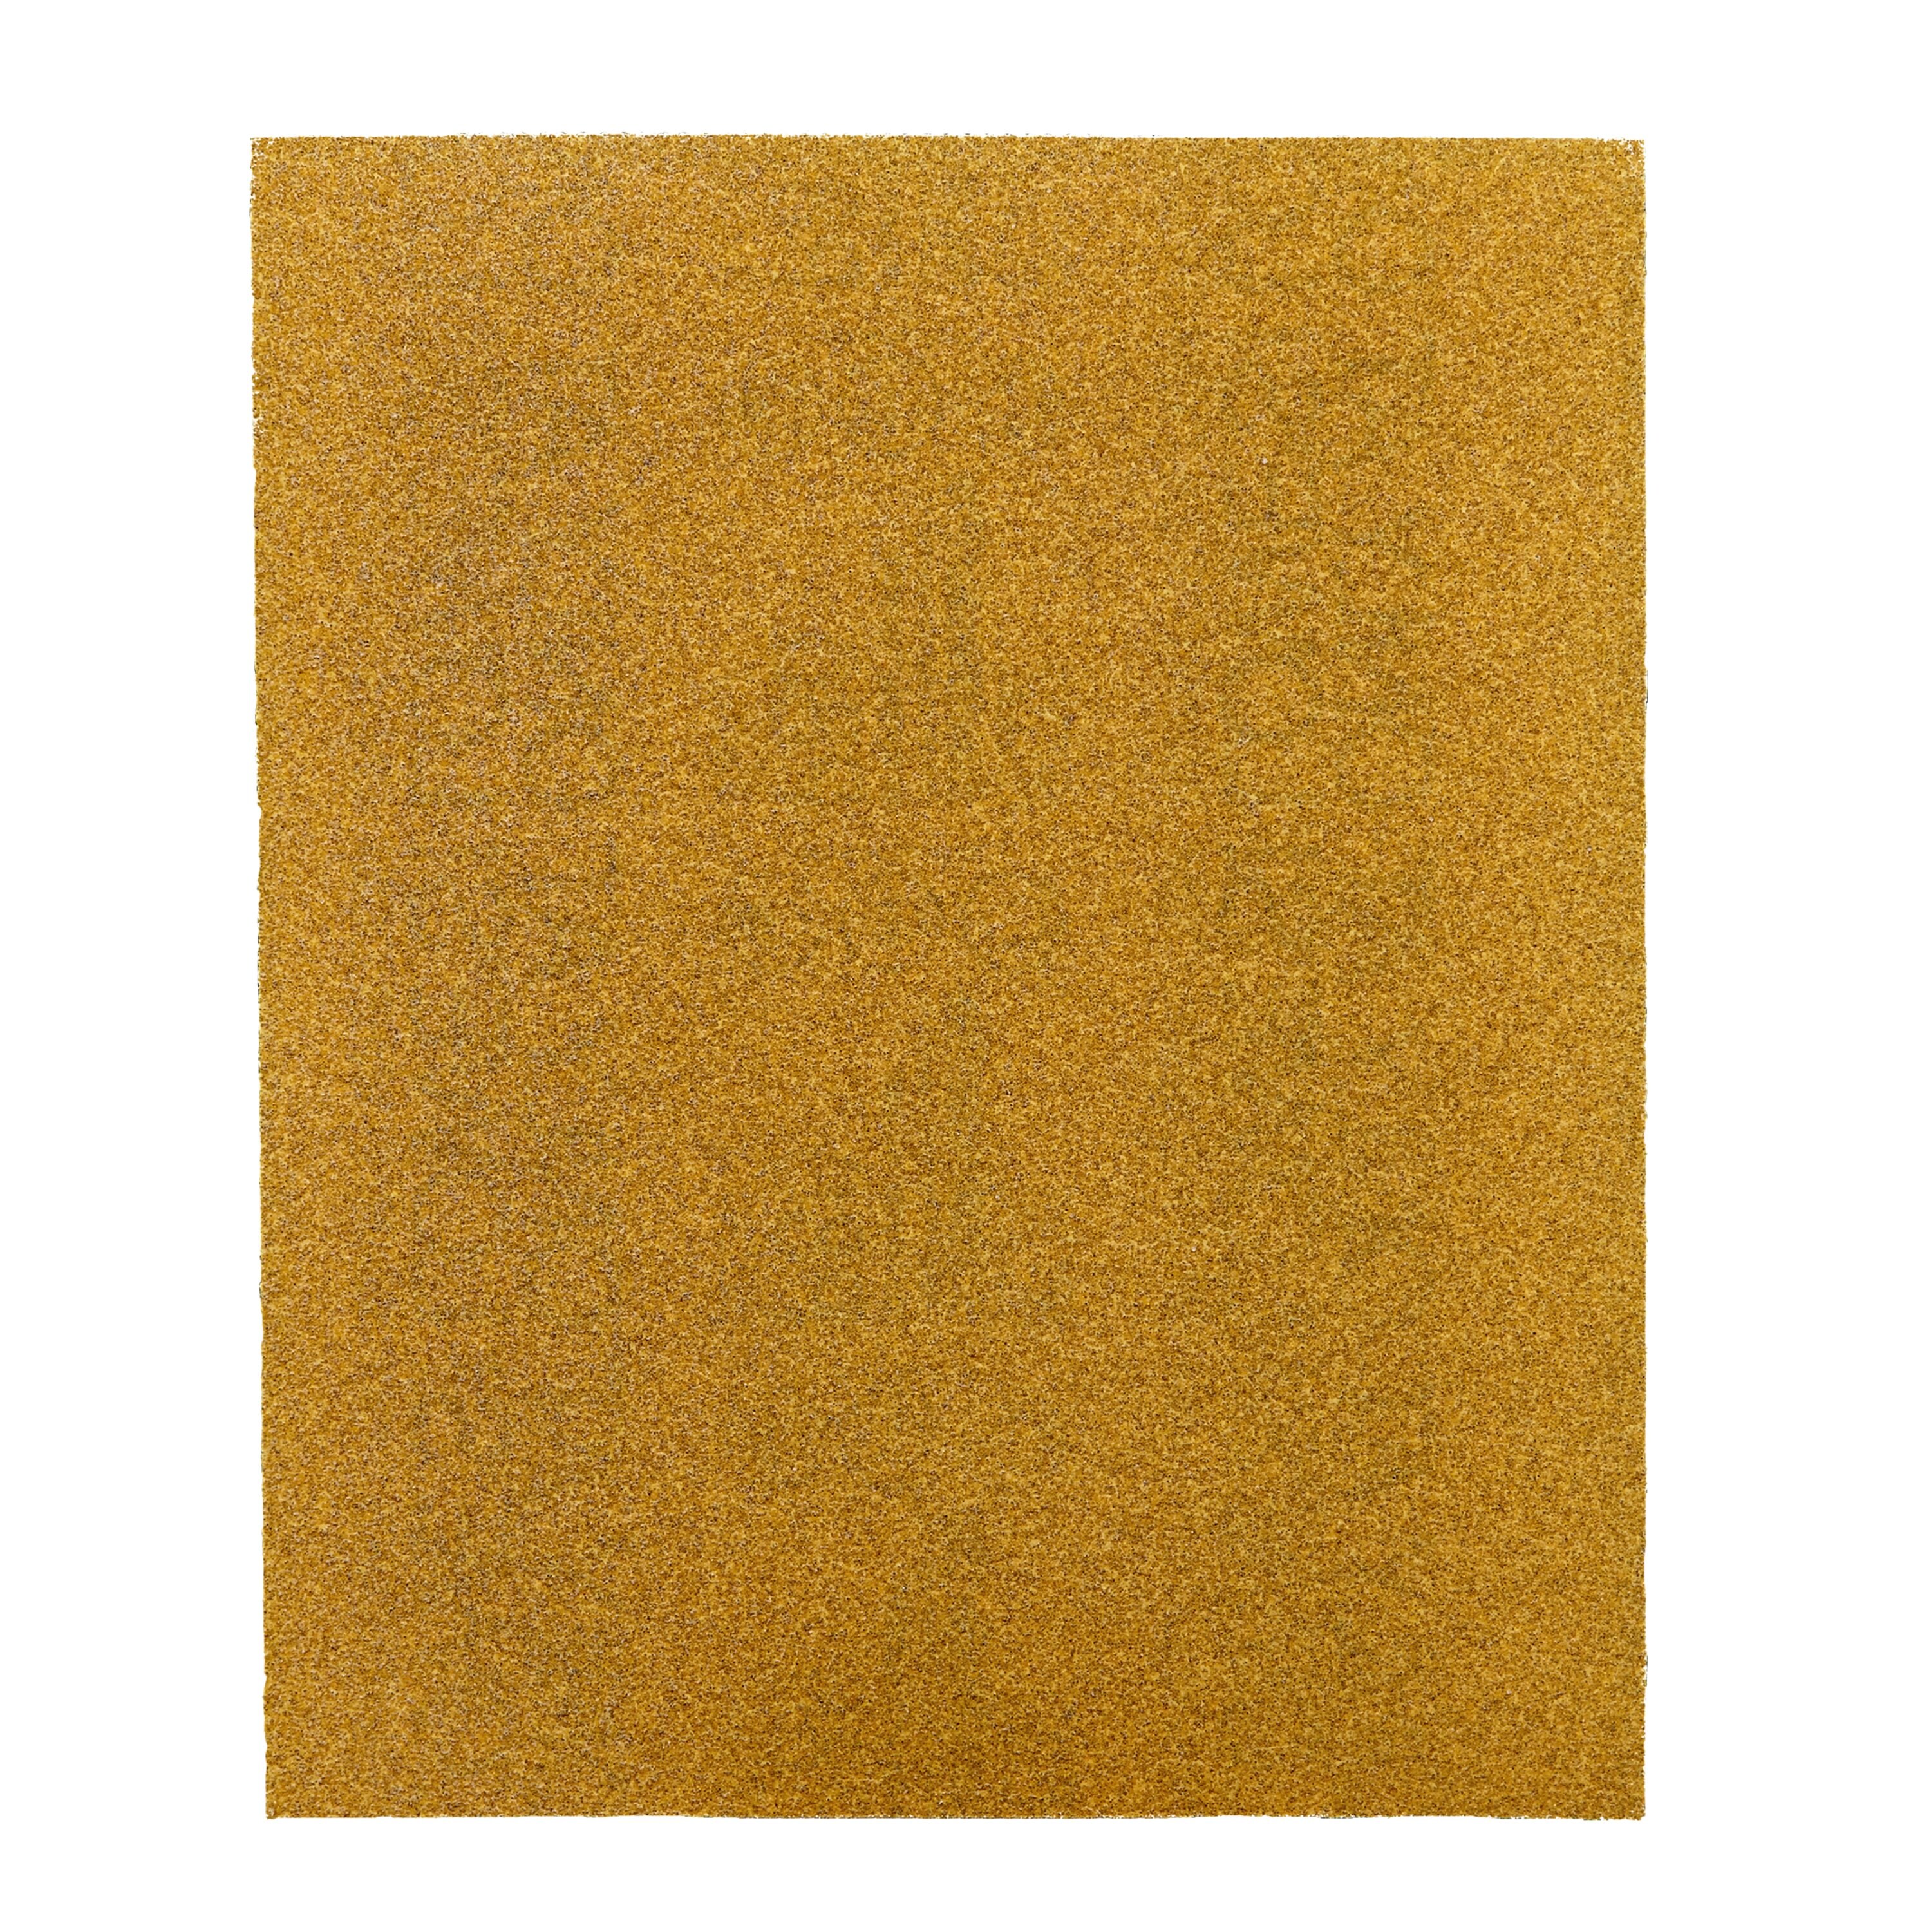 3M Garnet Sandpaper, 9 in. x 11 in., Assorted Grits, 5 Pack - image 2 of 2